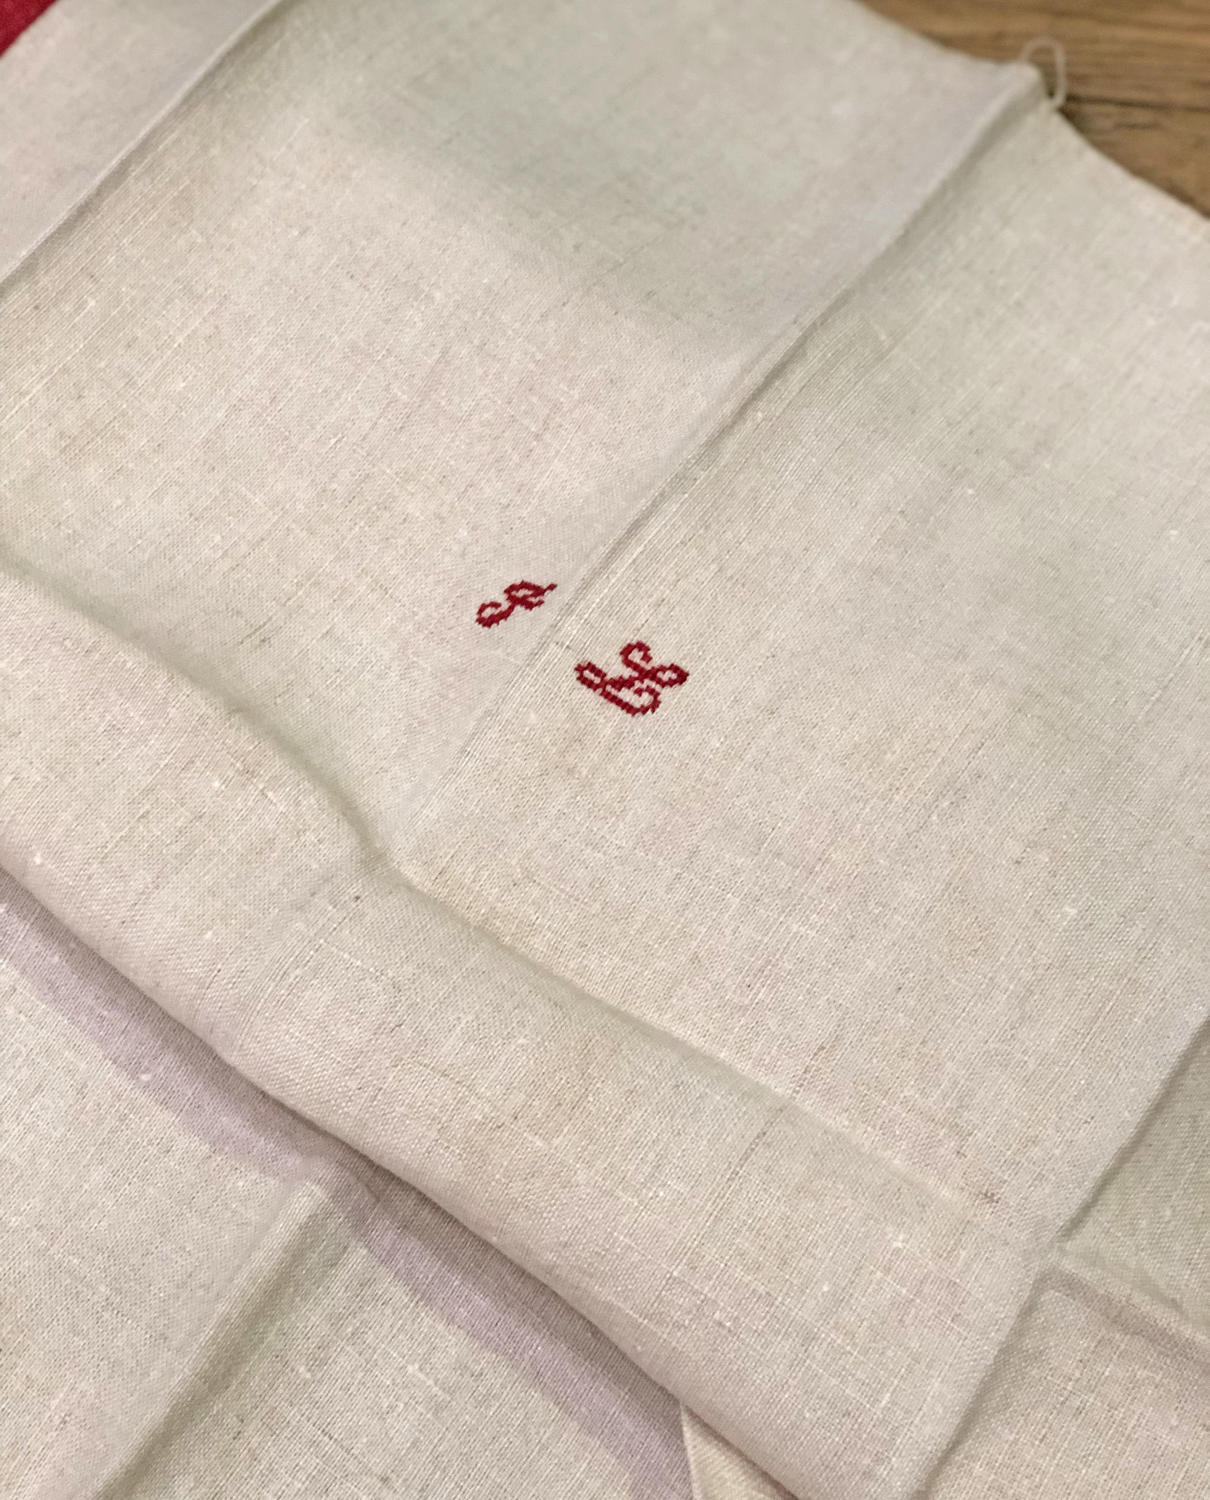 Bundle of 6 French Linen Tea-Towels with Red Stripe